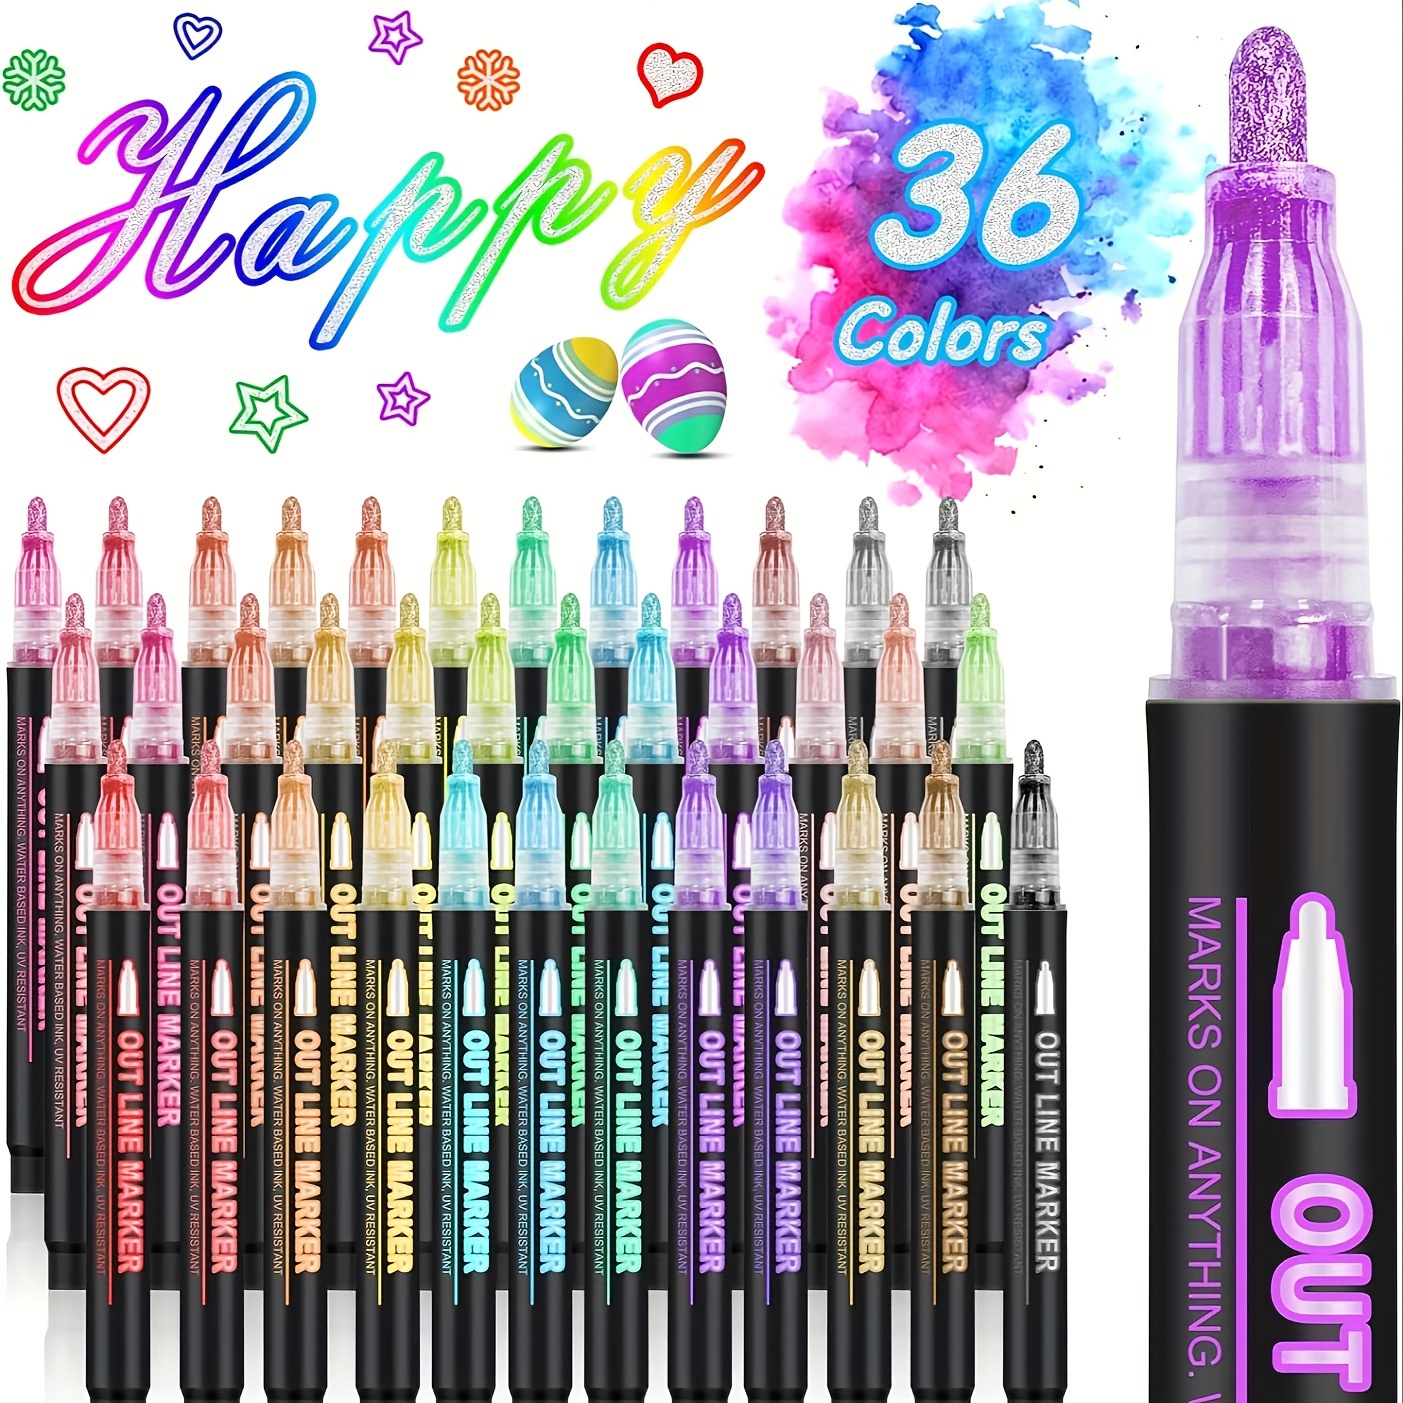 

36 Colors Outline Marker Pens, Outline Metallic Markers Glitter Writing Drawing Pens For Gift Card Writing, Drawing Pens For Birthday Greeting, Scrap Booking, Diy Art Crafts